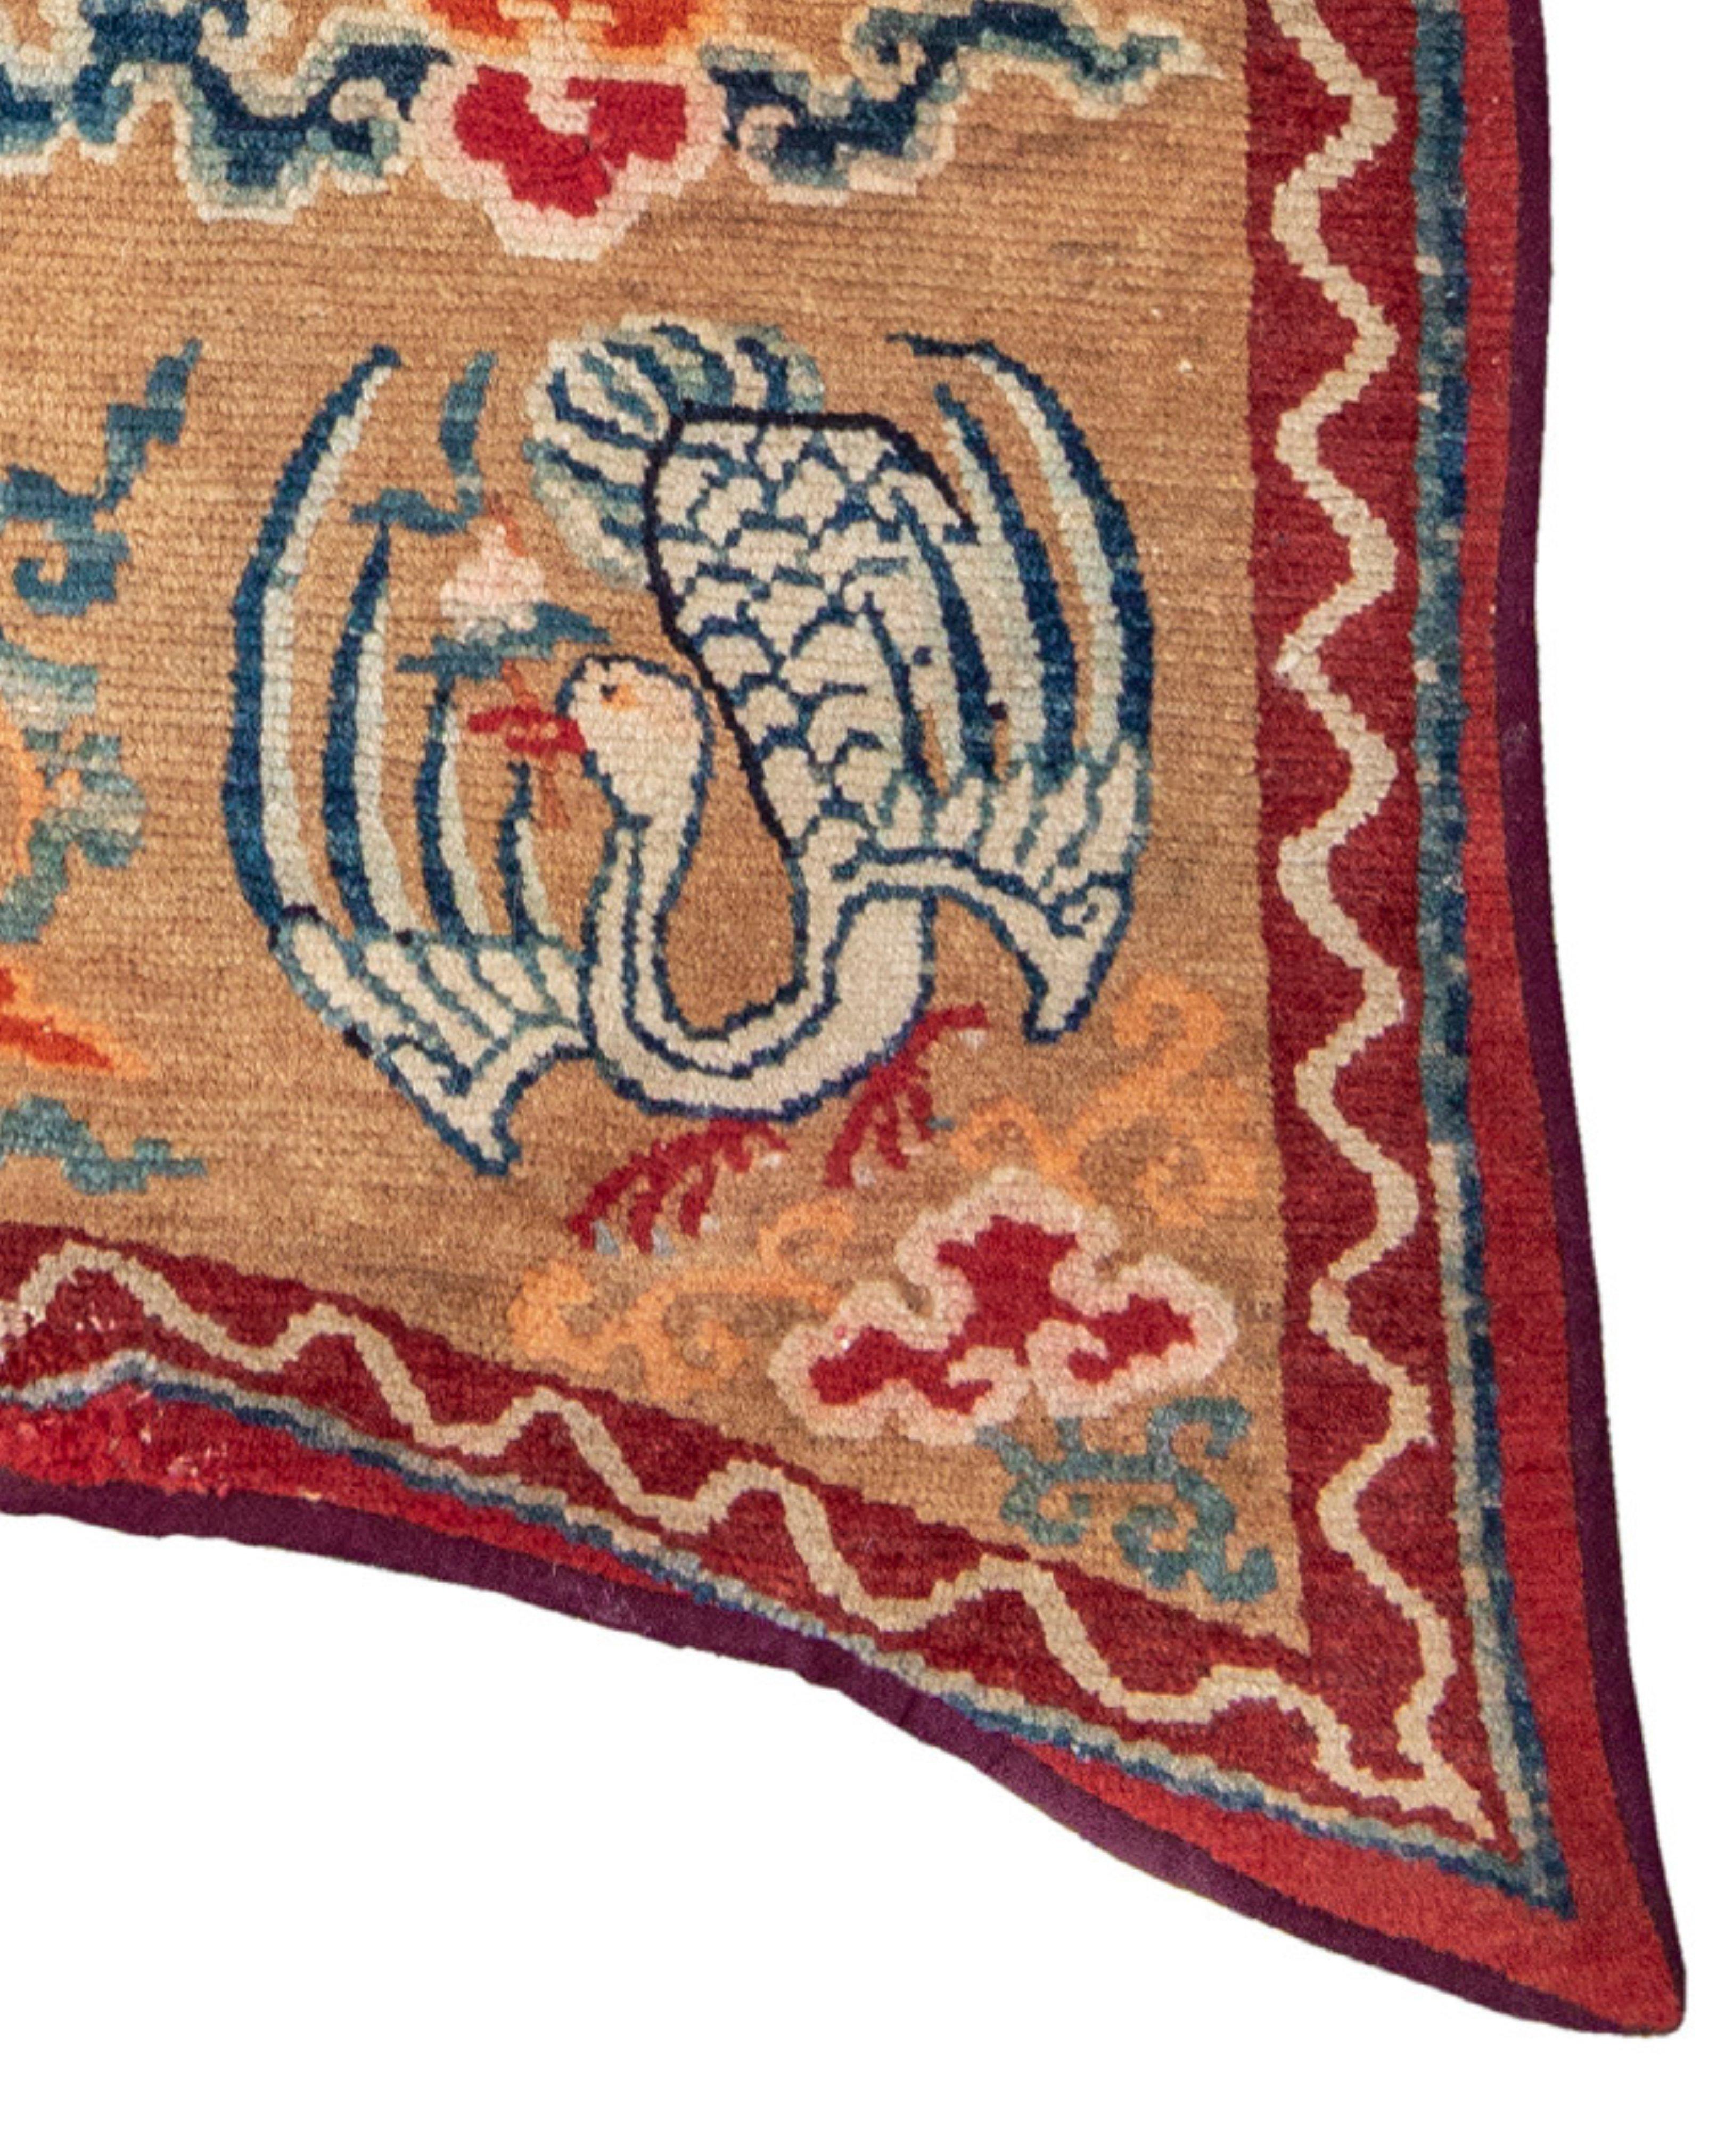 Tibetan Saddle Cover, Late 19th Century In Excellent Condition For Sale In San Francisco, CA